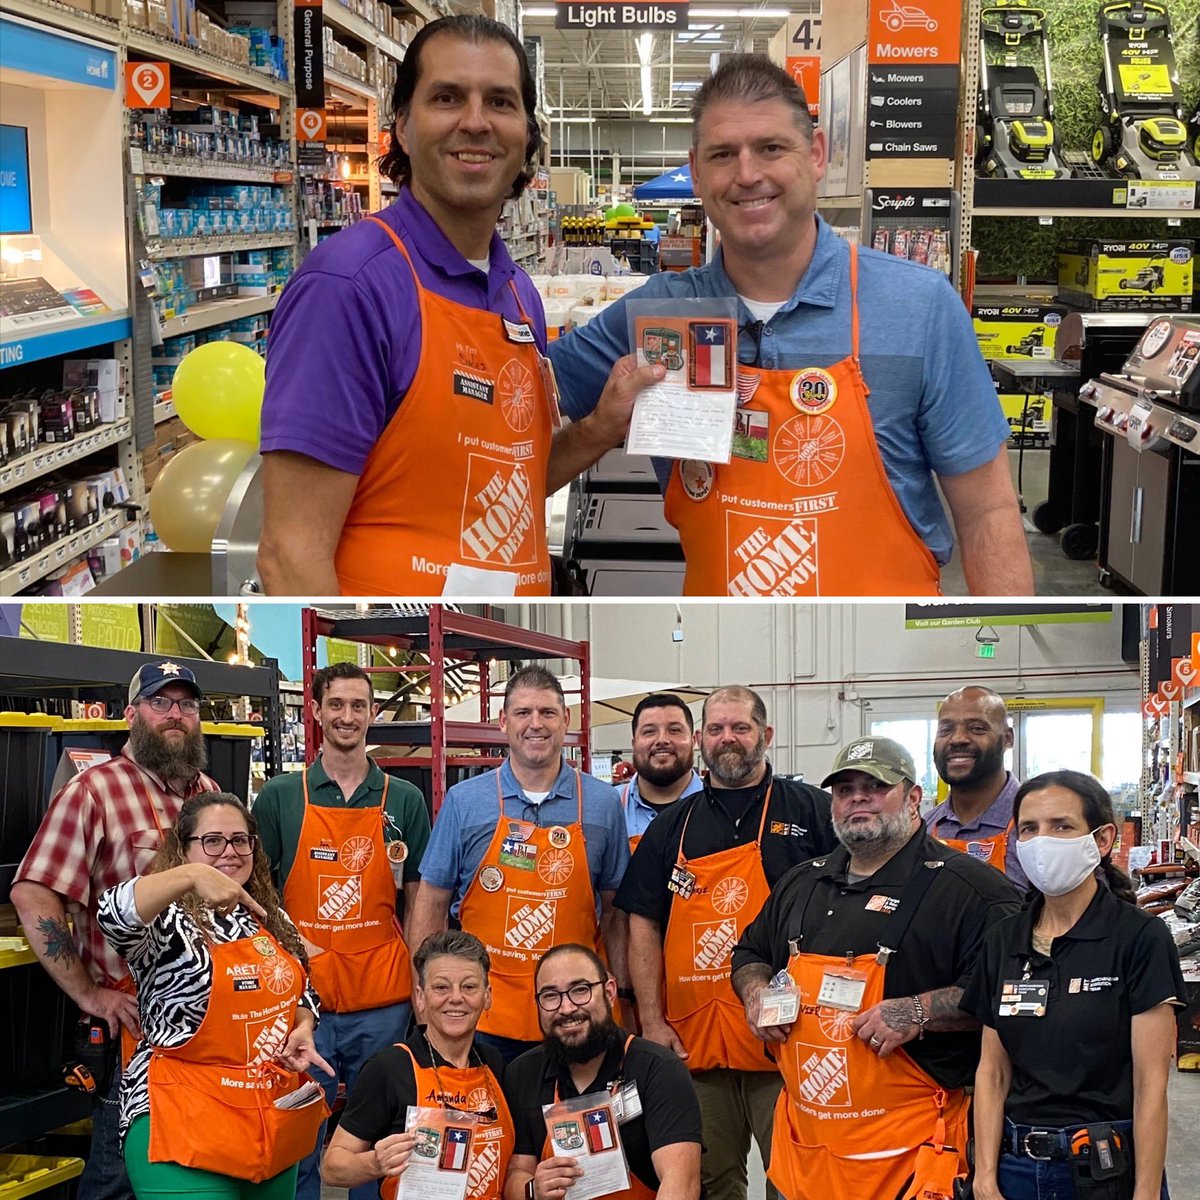 Great job to our teams in Four Points and Hutto getting ready for Labor Day! The stores looked great and the teams were really engaged! #PoweroftheGulf @ericbernal01 @garland_haynes